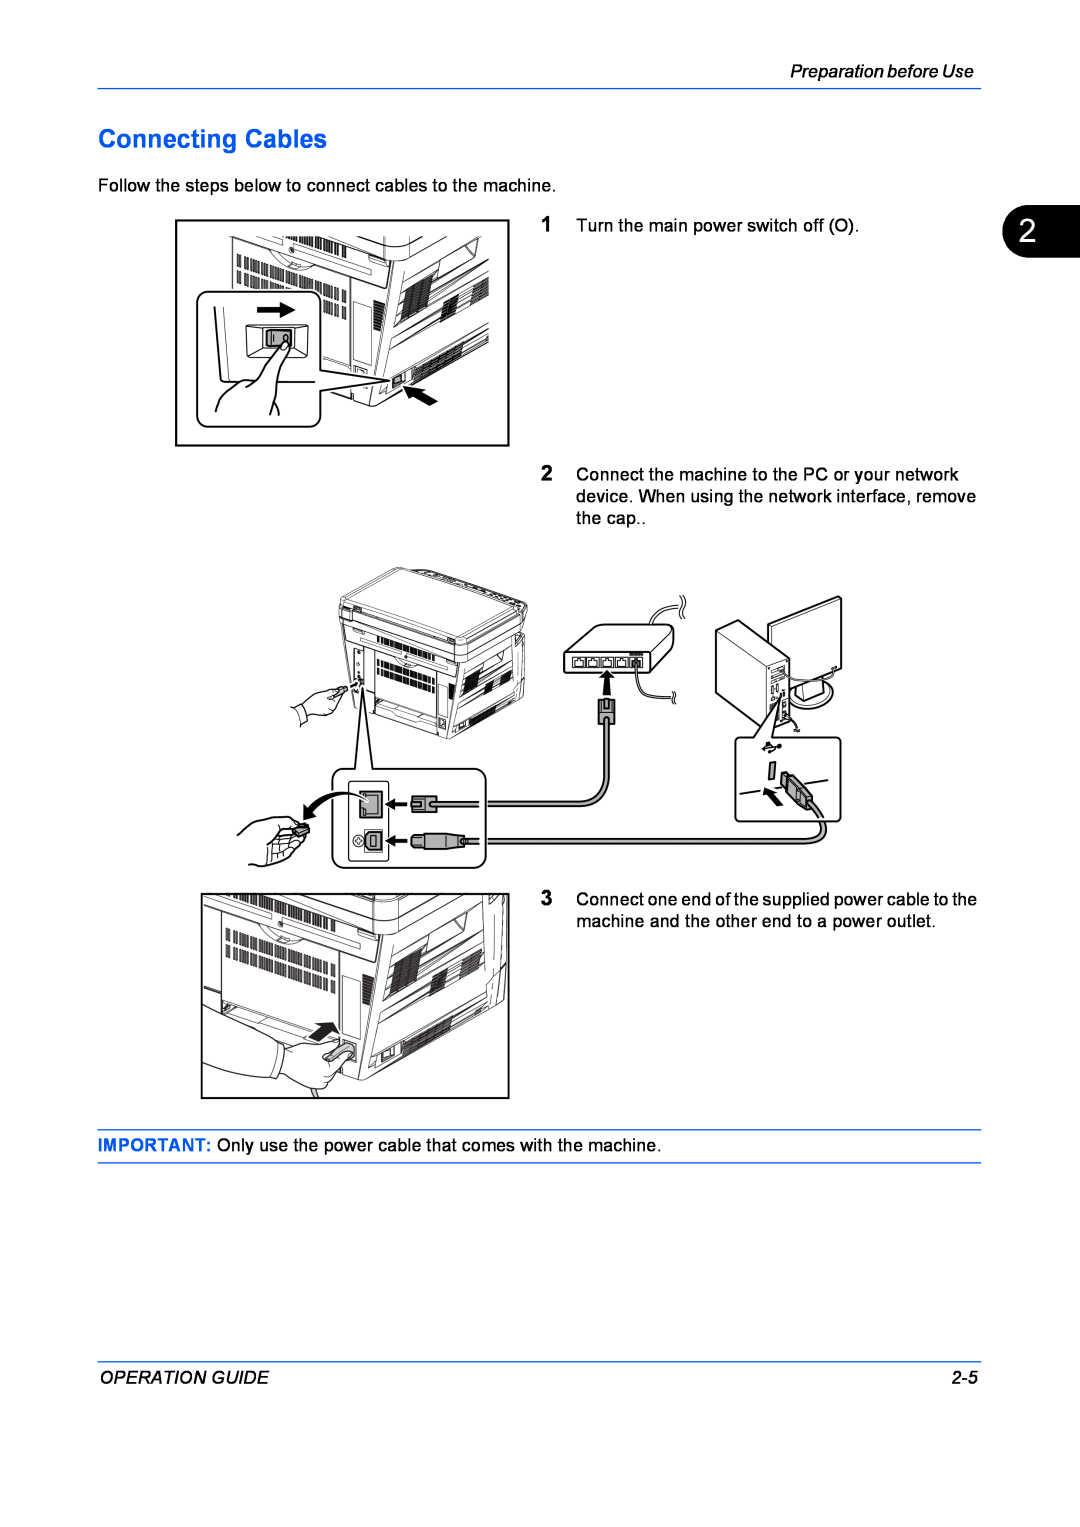 Kyocera FS-1128MFP, FS-1028MFP manual Connecting Cables, Preparation before Use, Operation Guide 